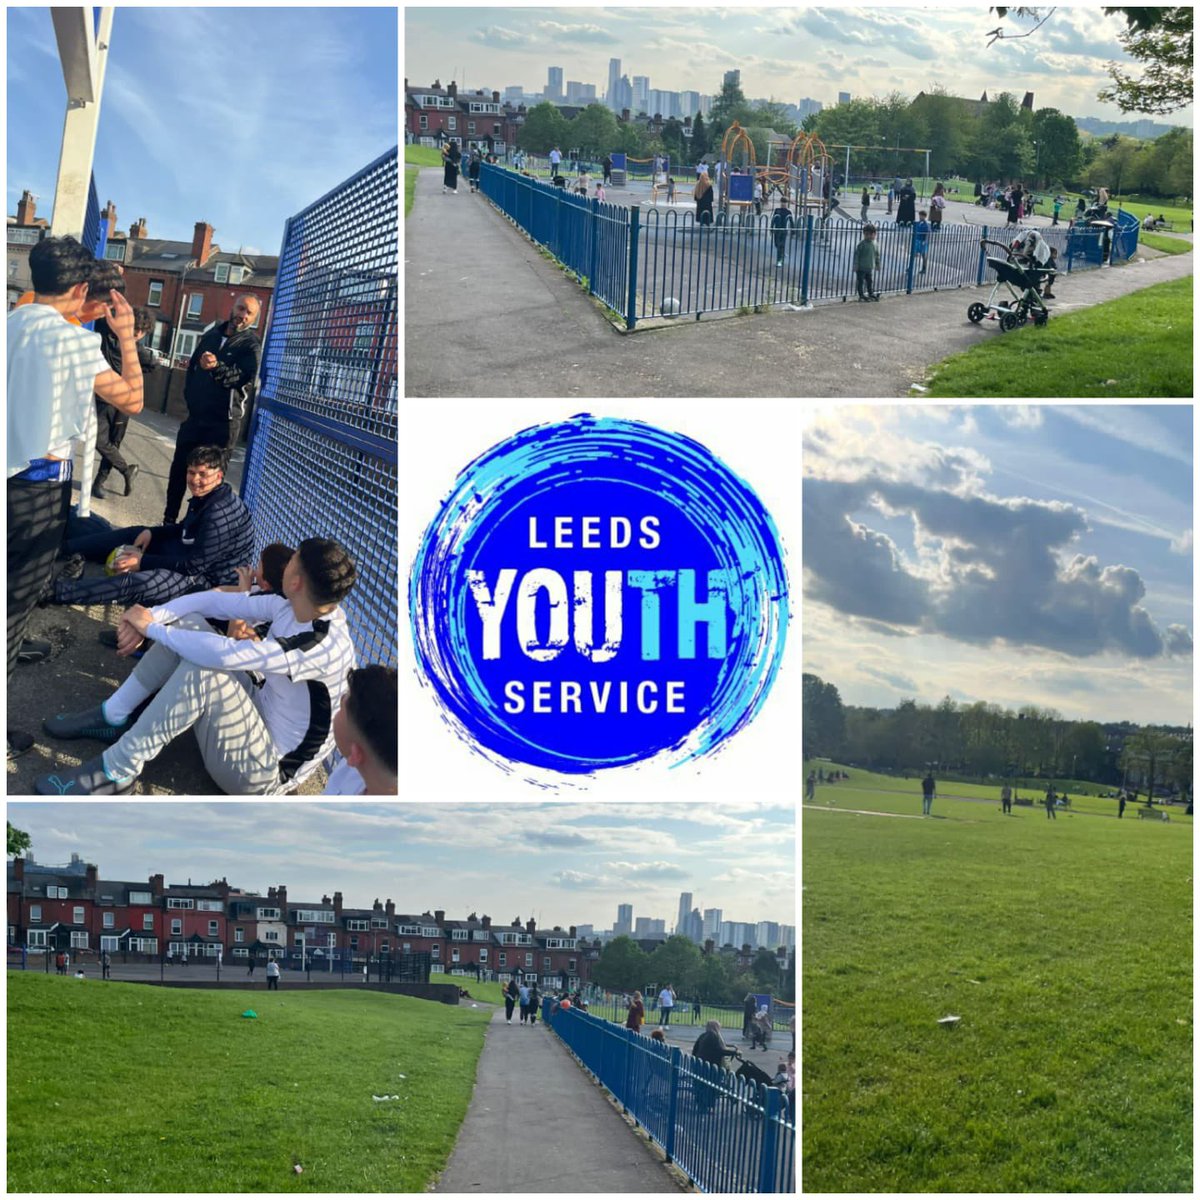 Great evening for our #Gipton & #Harehiils #Youthwork team ☀️ 

#Engaging with #Youngpeople from across the #community on a range of issues 

#LeedsYouthService 
#DetachedYouthwork